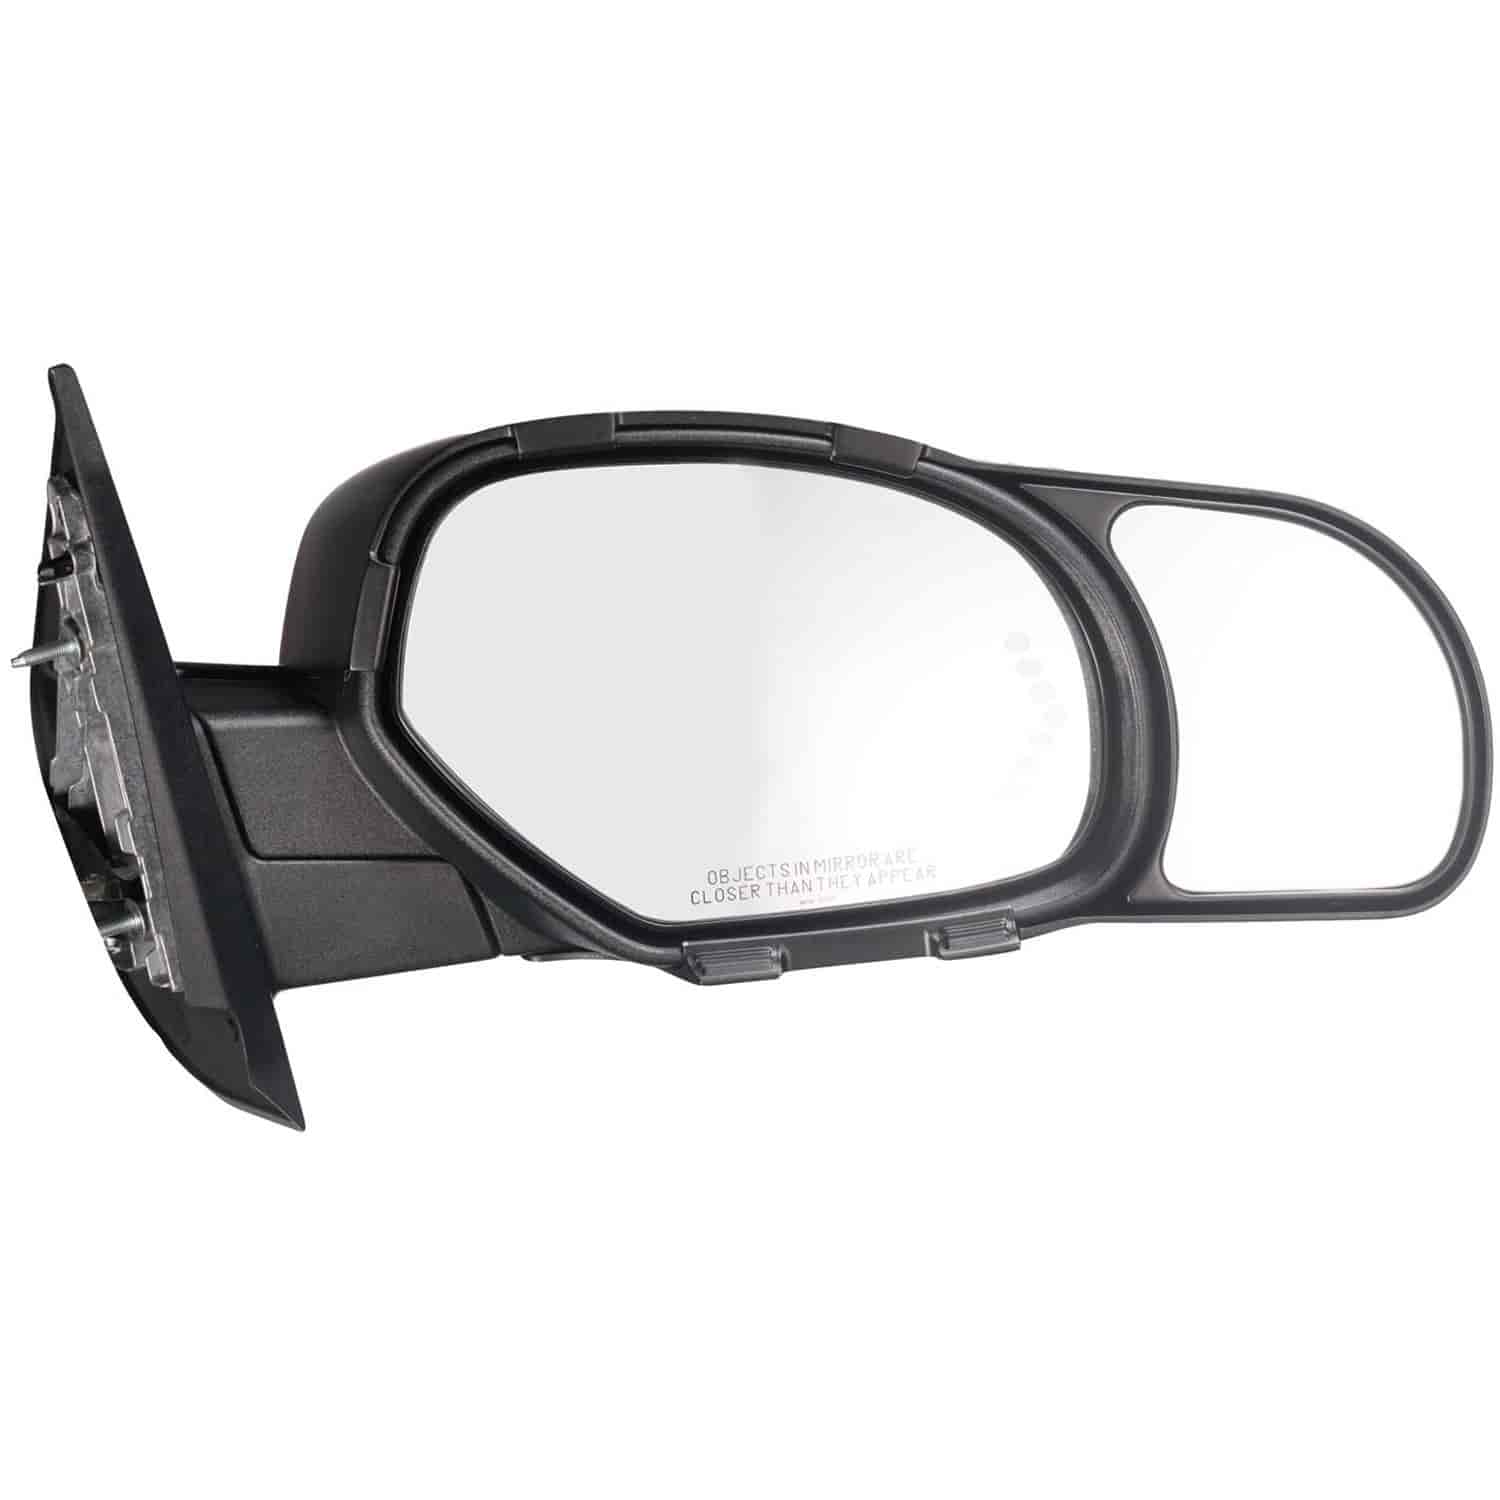 Snap-On Towing Mirrors Fits 2007 to 2013 Chevy Silverado & GMC Sierra